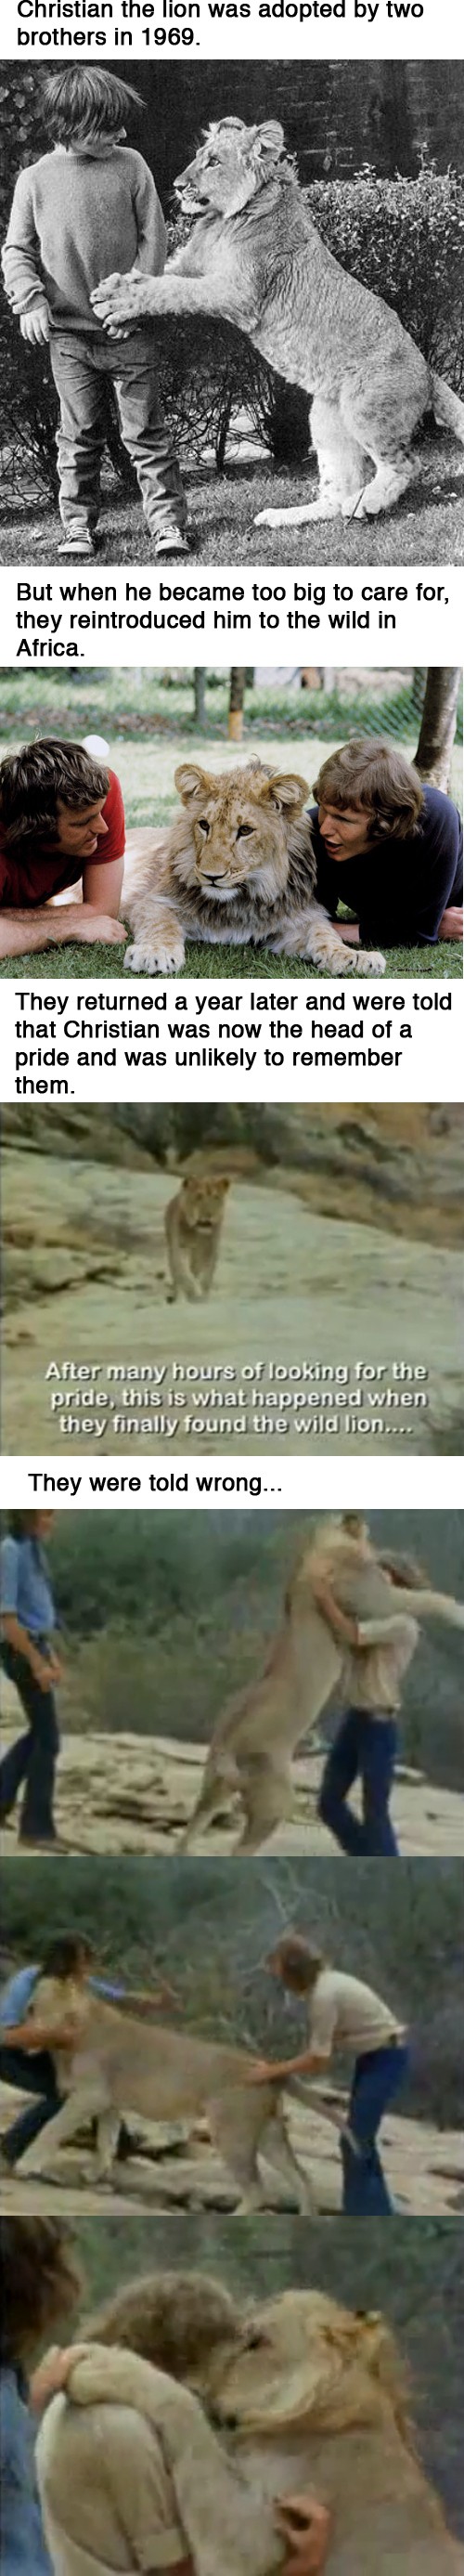 Christian the Lion's amazing story.